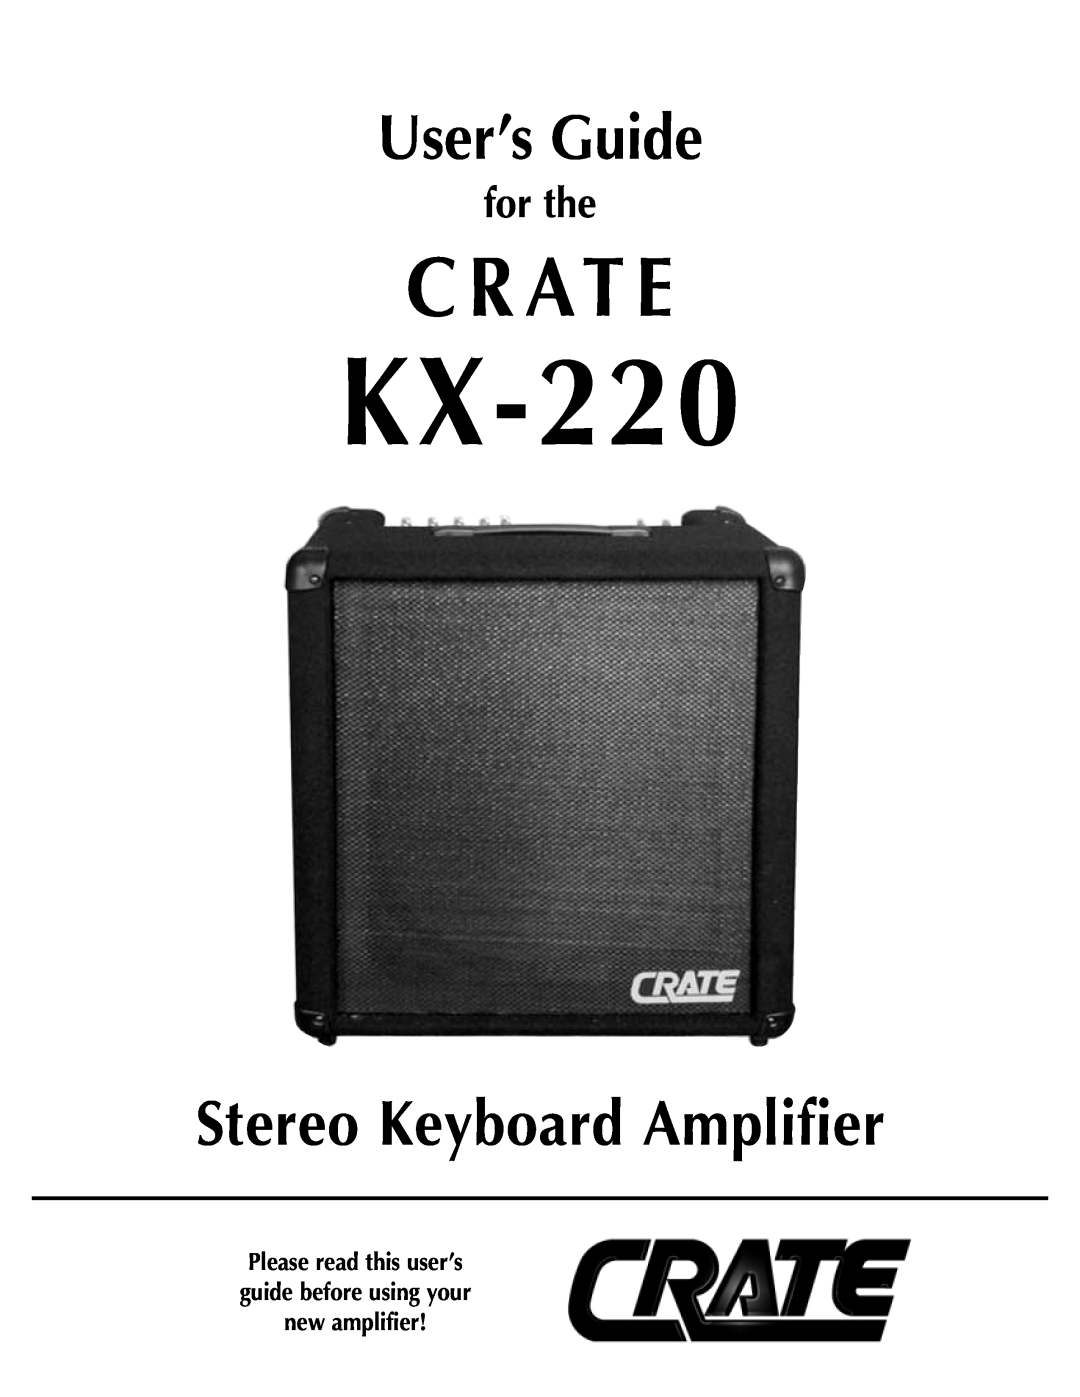 Crate Amplifiers KX-220 manual C R At E, User’s Guide, Stereo Keyboard Amplifier, for the 